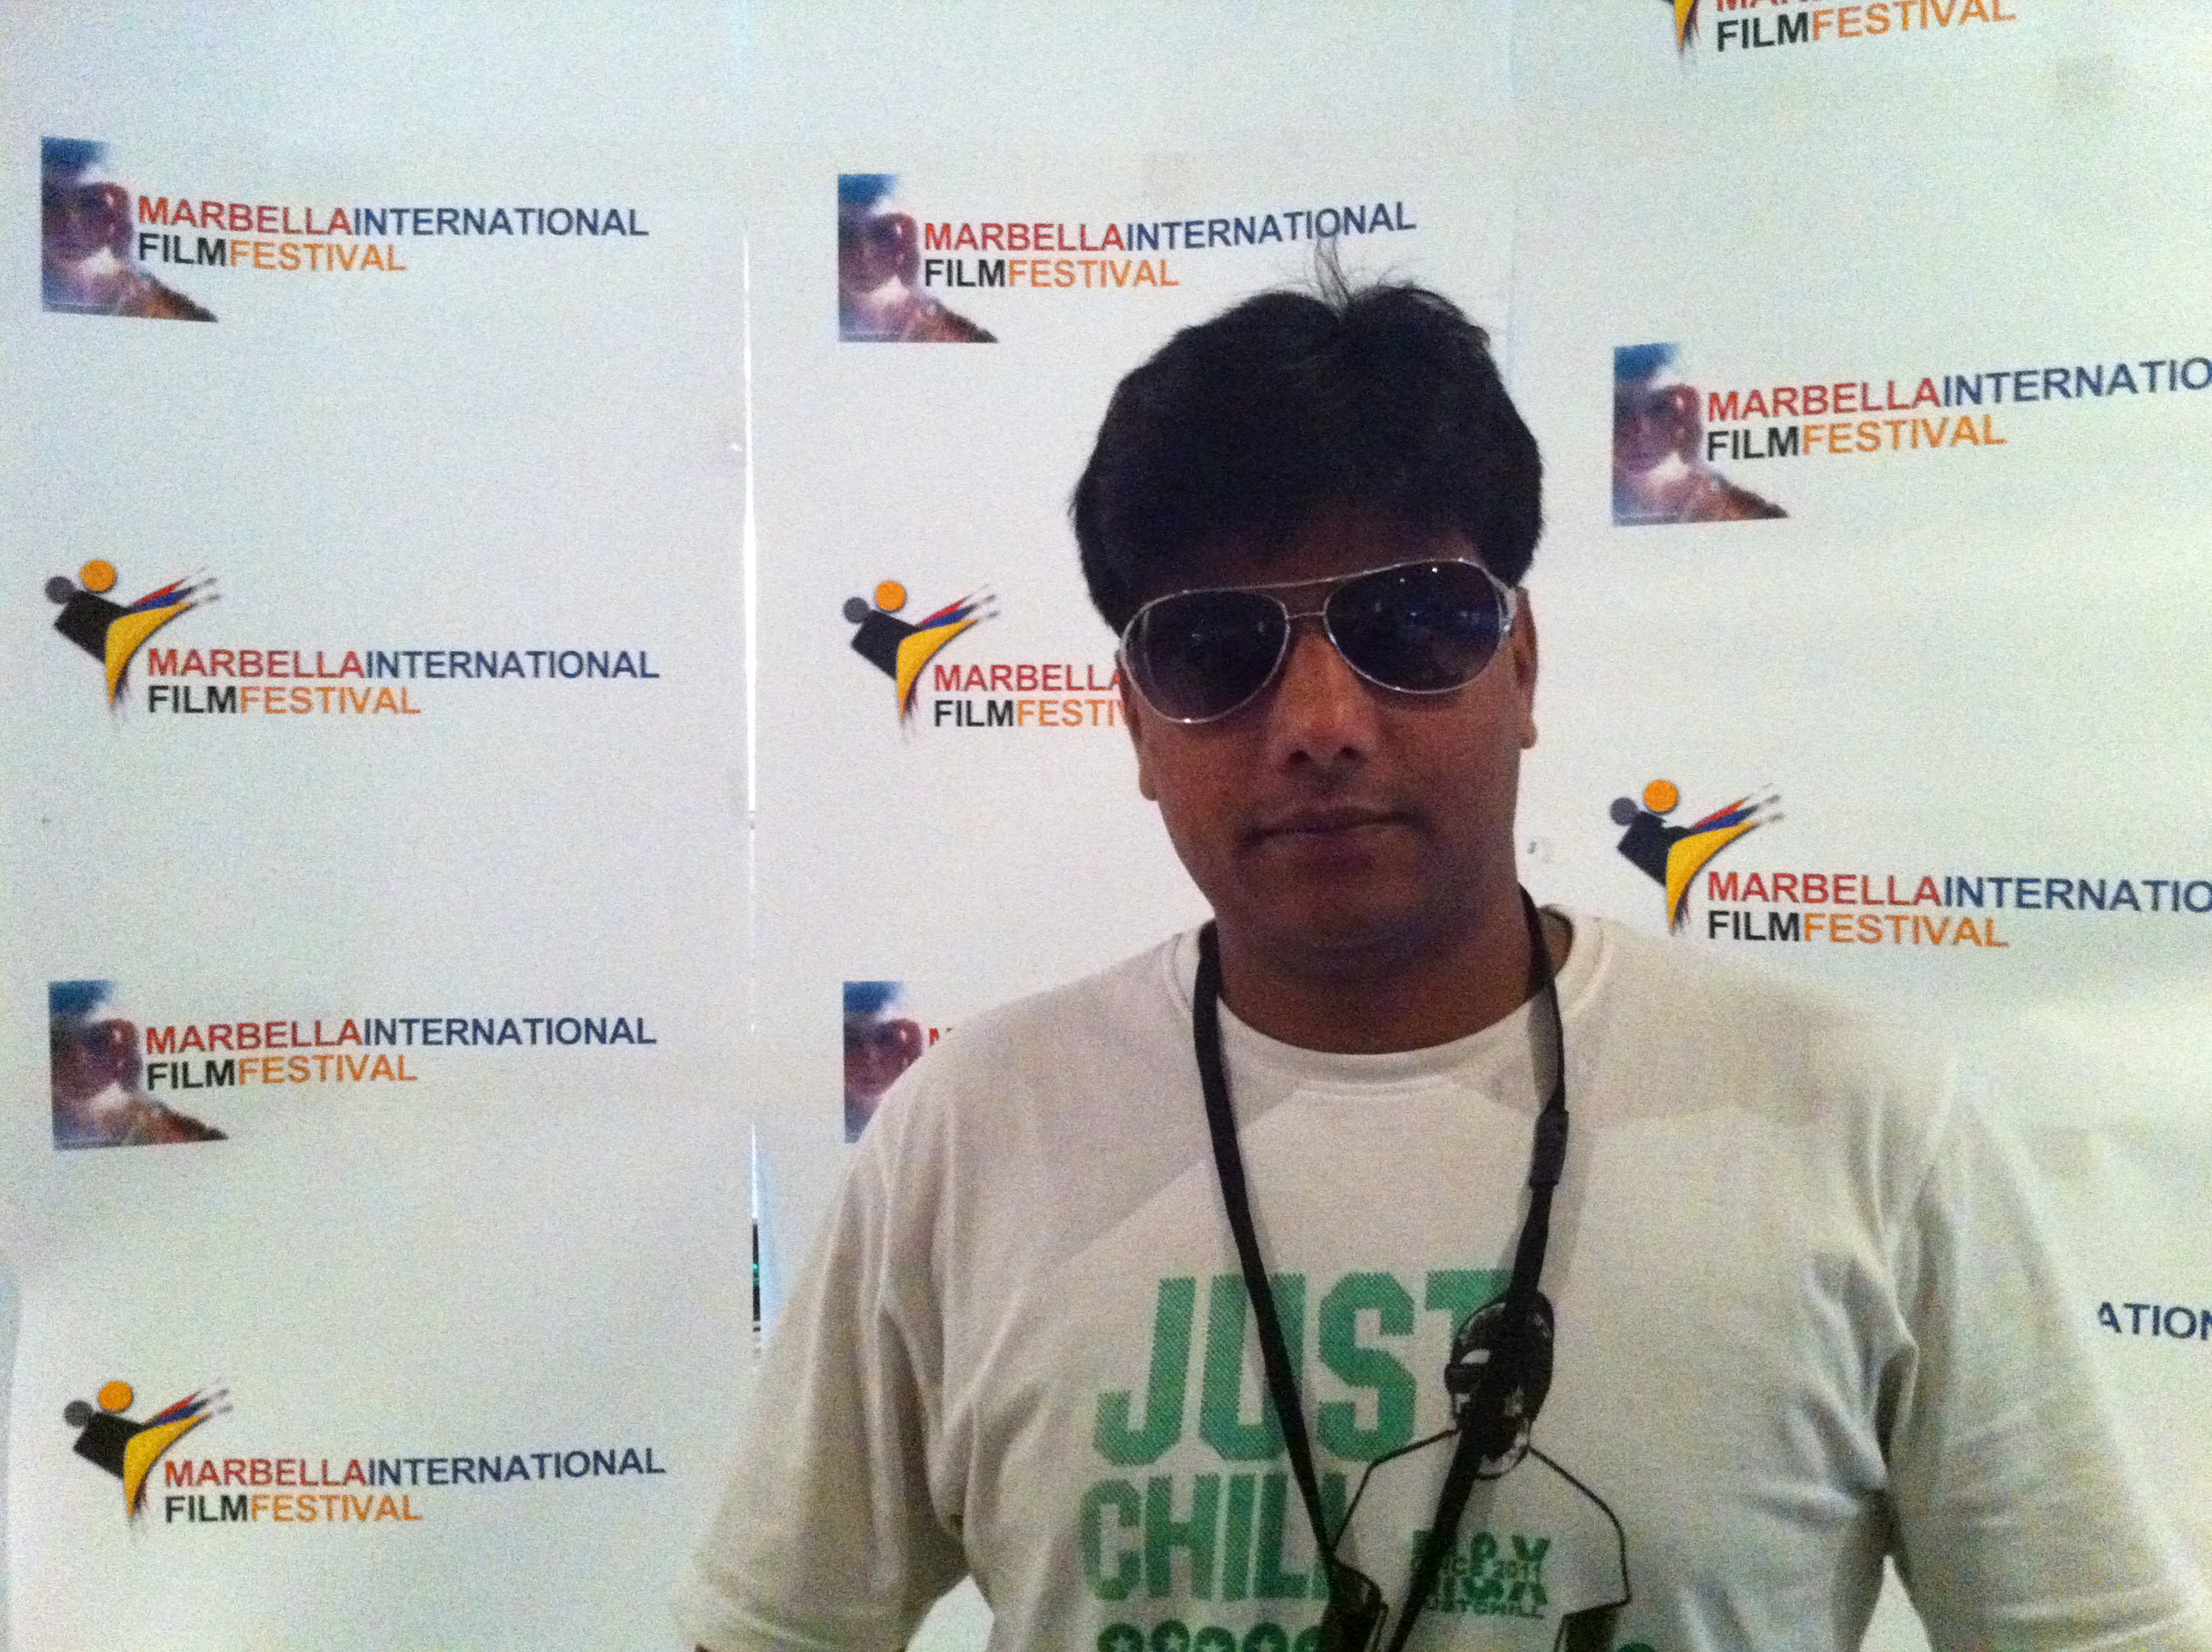 Mukesh in Spain at Marbella International Film Festival-2011, with his feature film 